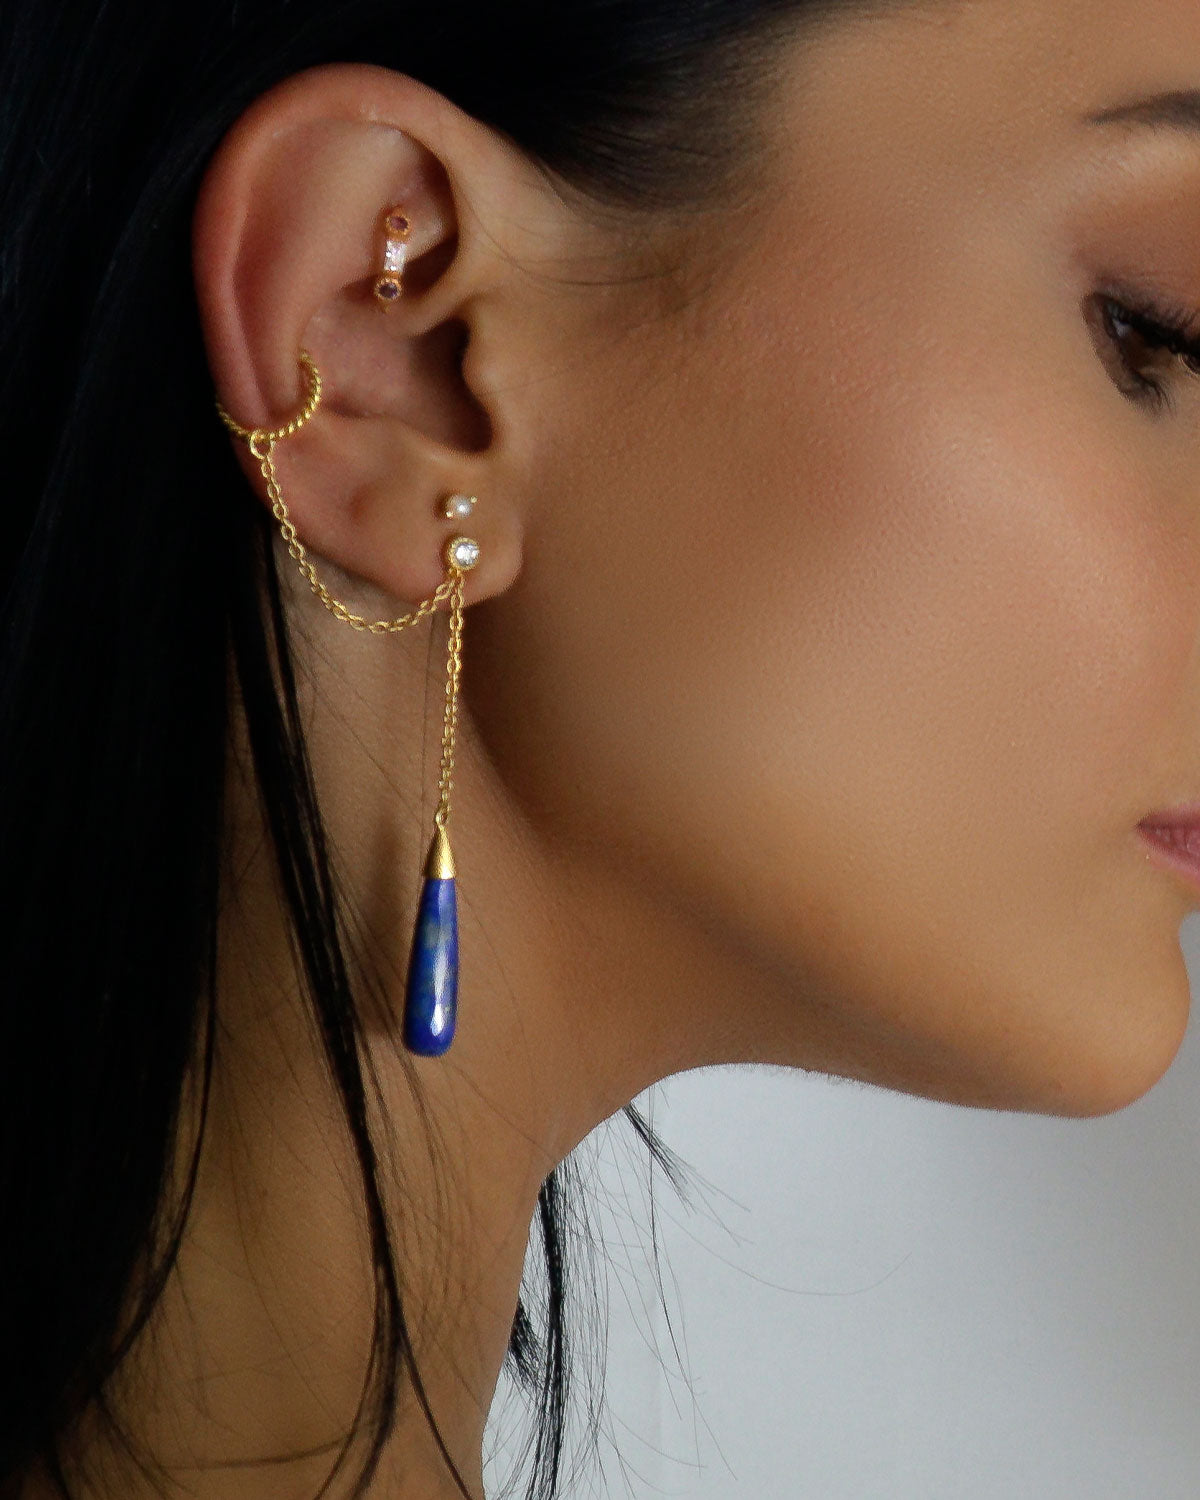 Exceptional Lapis Lazuli Gold Earrings - Moon London